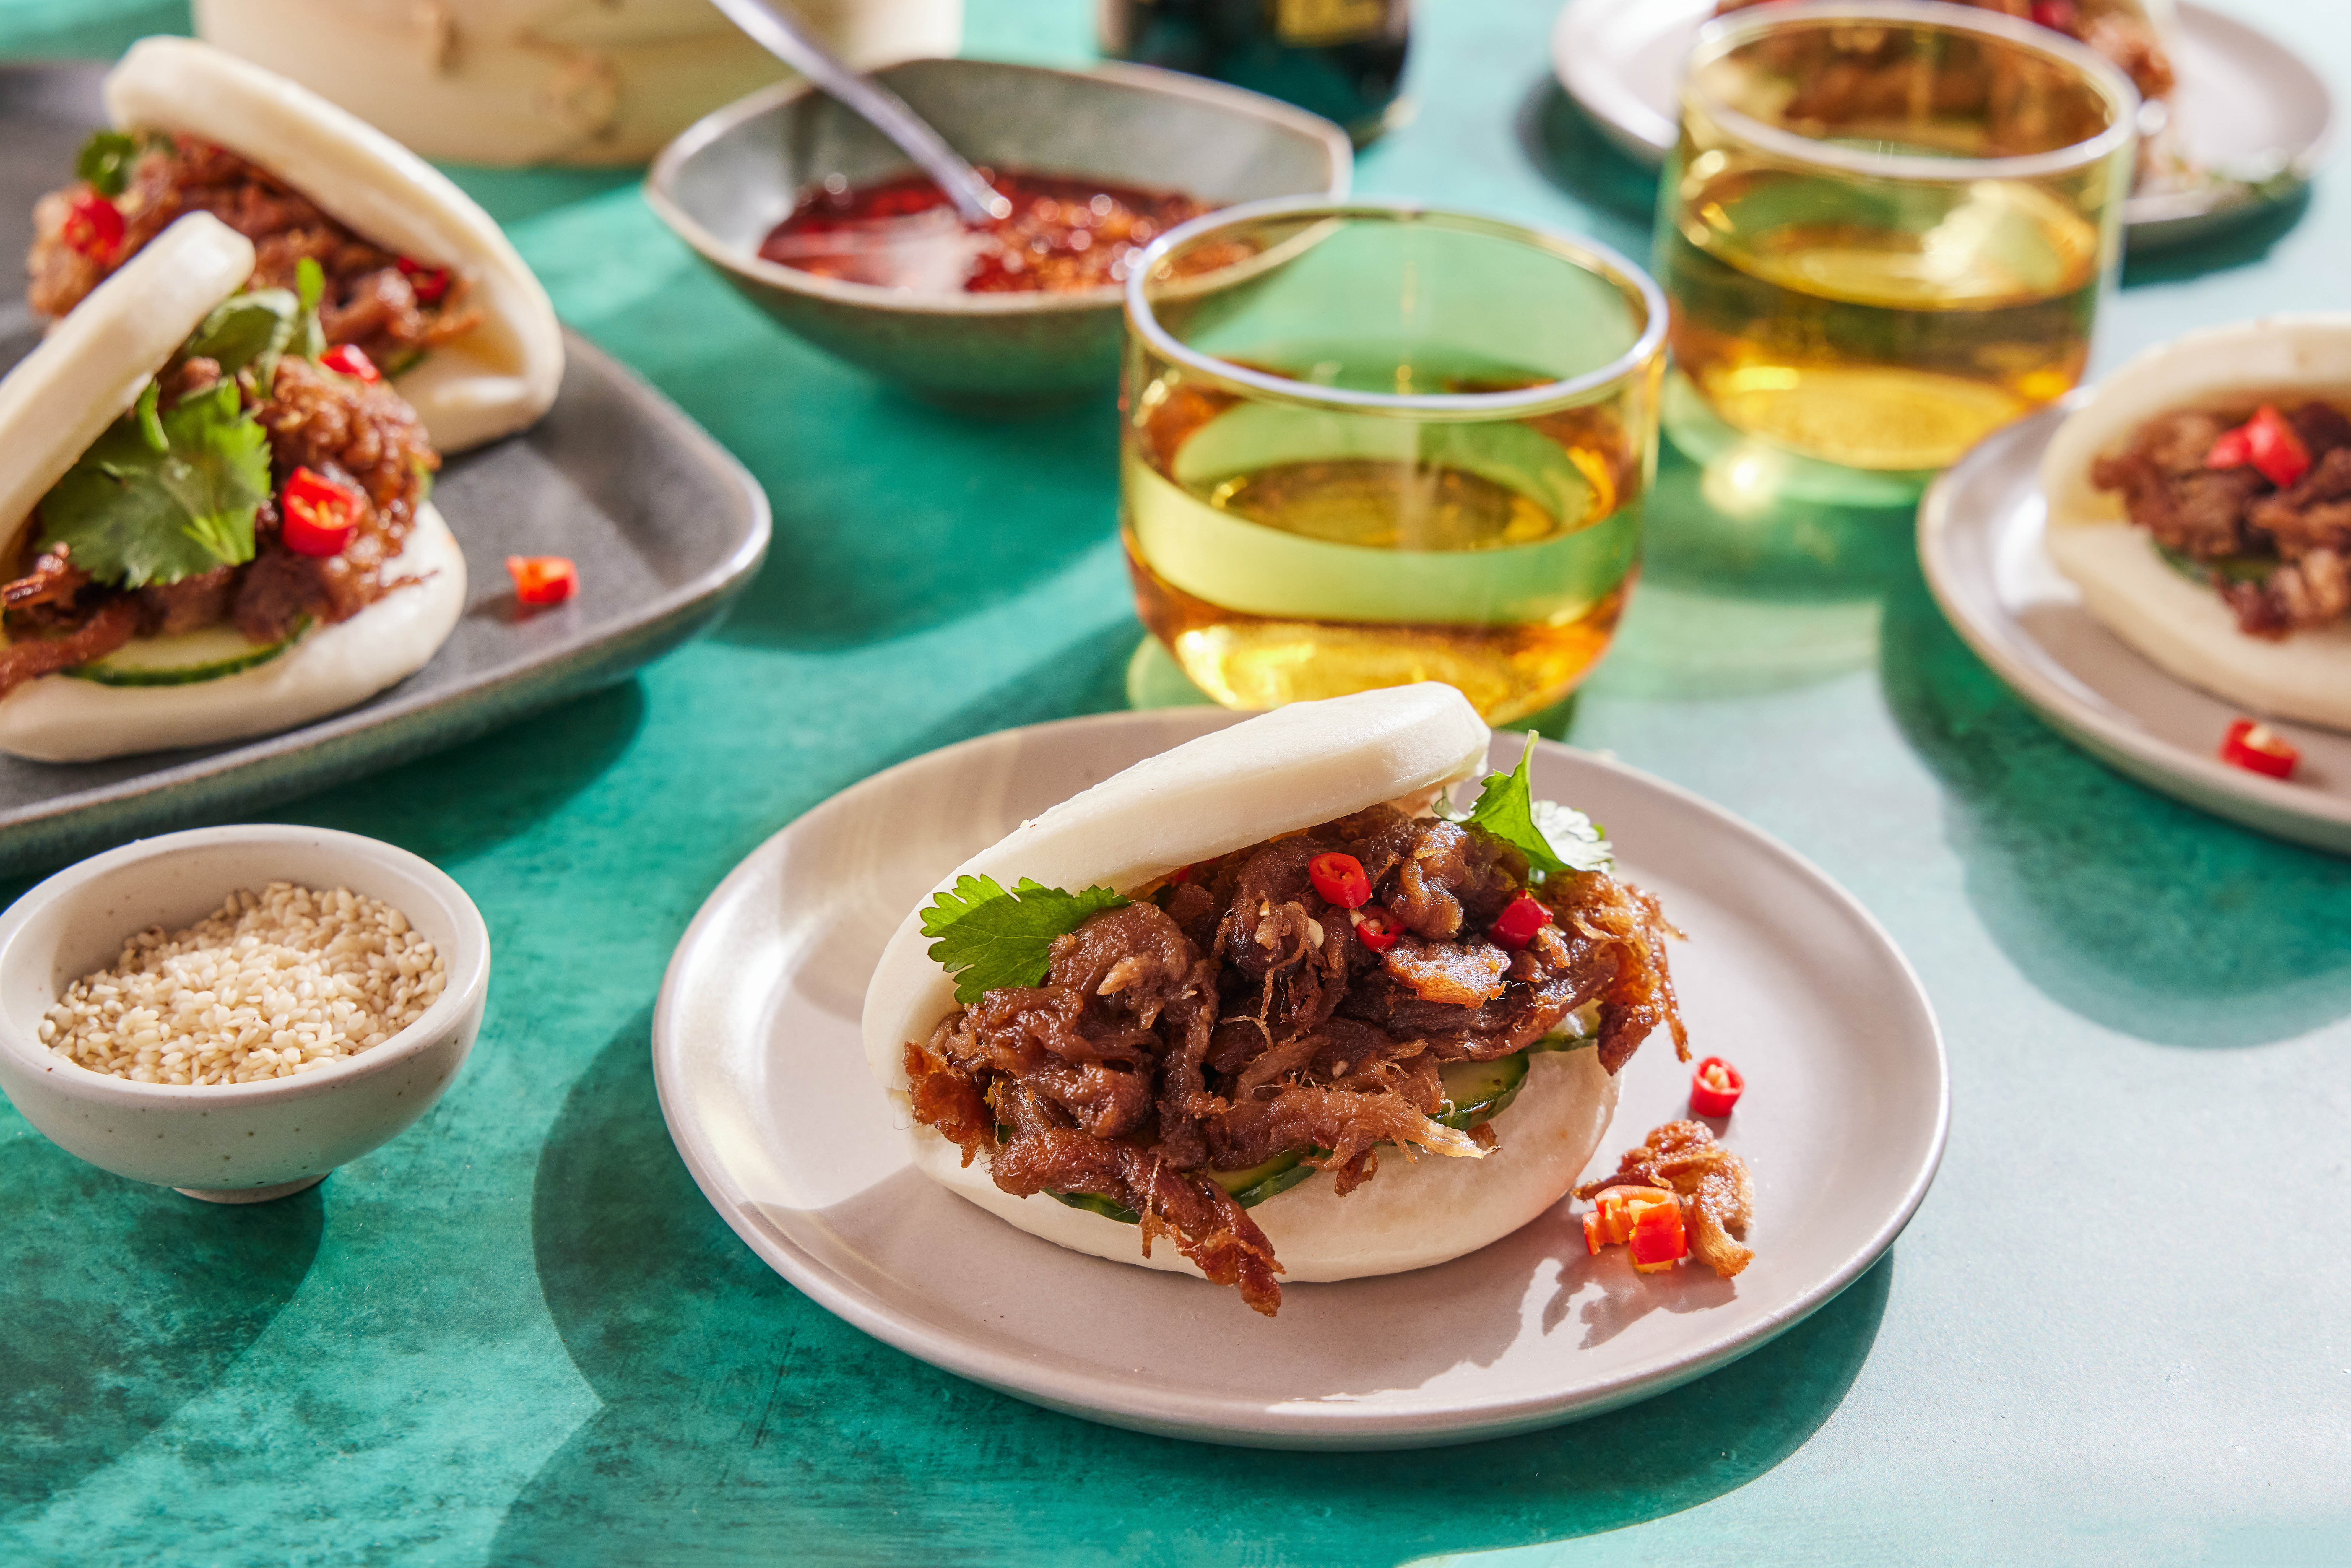 Tender™ plant-based shredded pork bao buns on a gray plate, accompanied by a bowl of chili sauce and glasses of tea on a teal table.